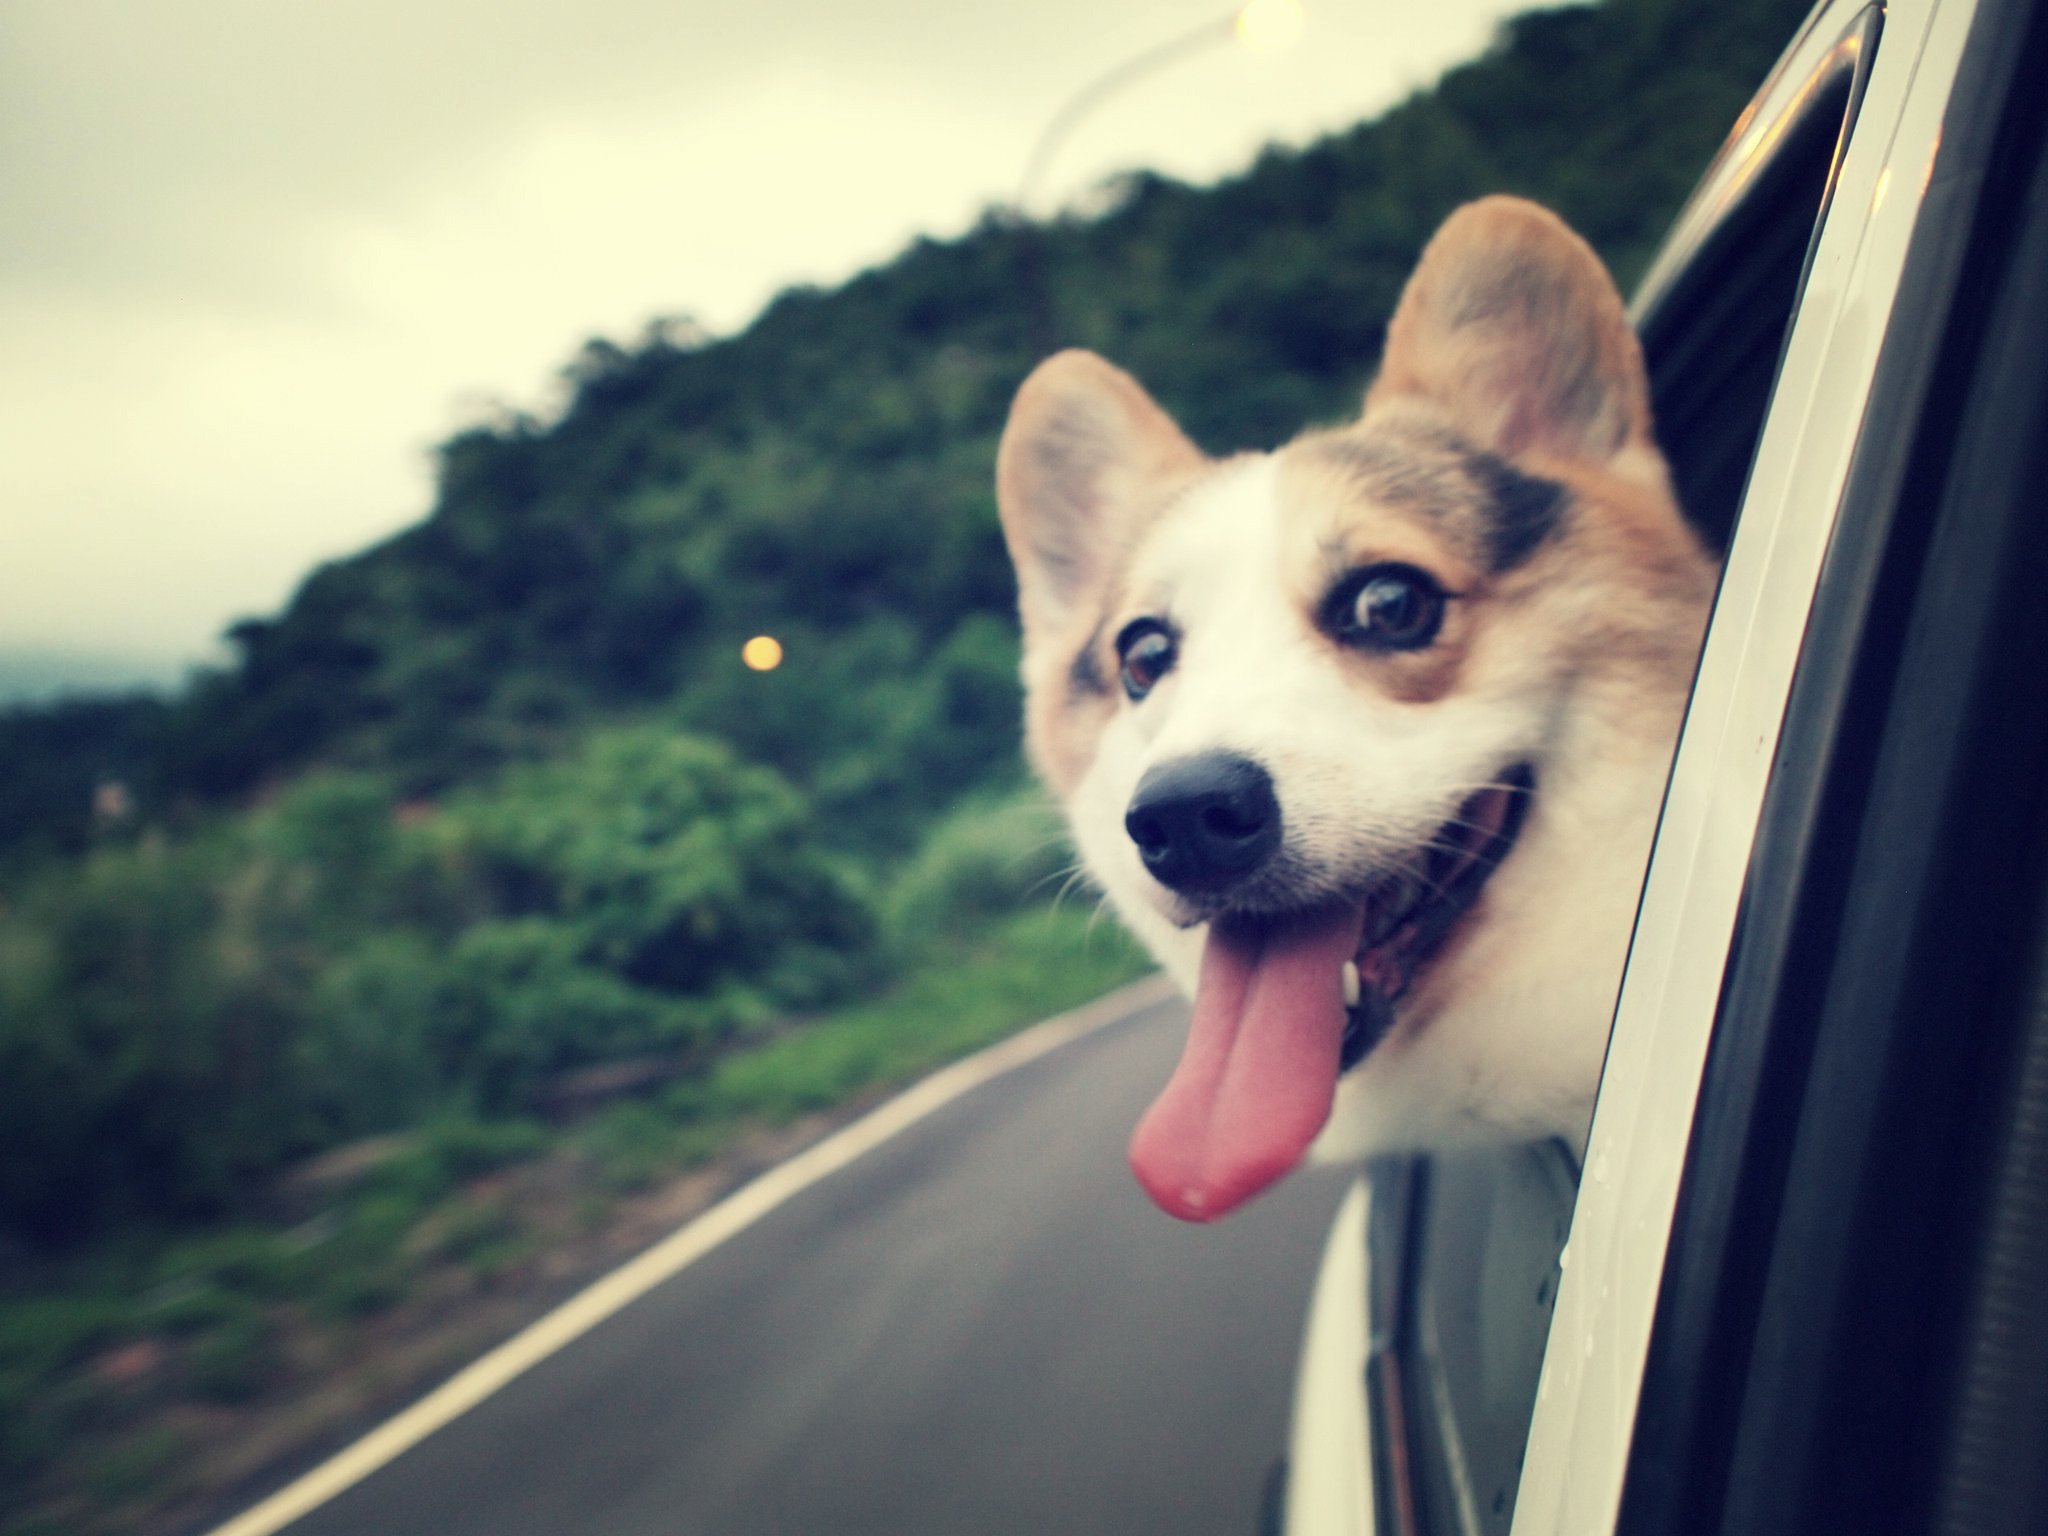 Would you like to take a ride in my car? | Animals Zone